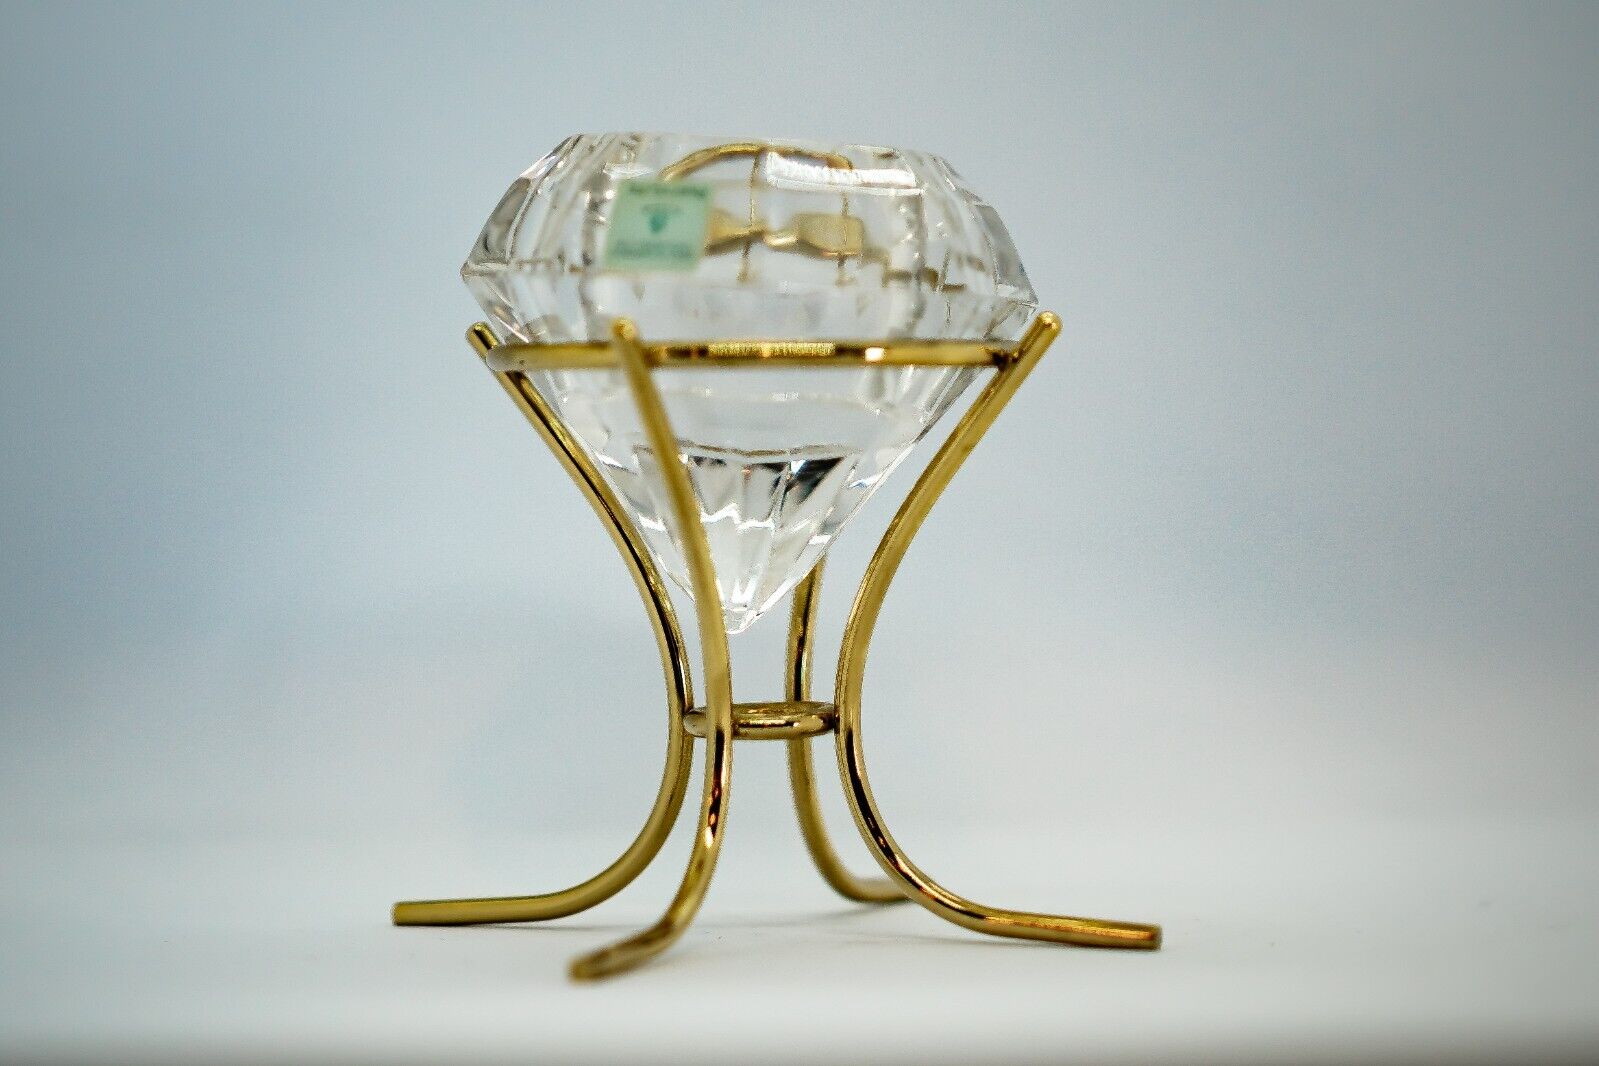 Crystal Candle Holder, Diamond Snapped W/ Gold Tone Metal Stand / Base 4.75” H